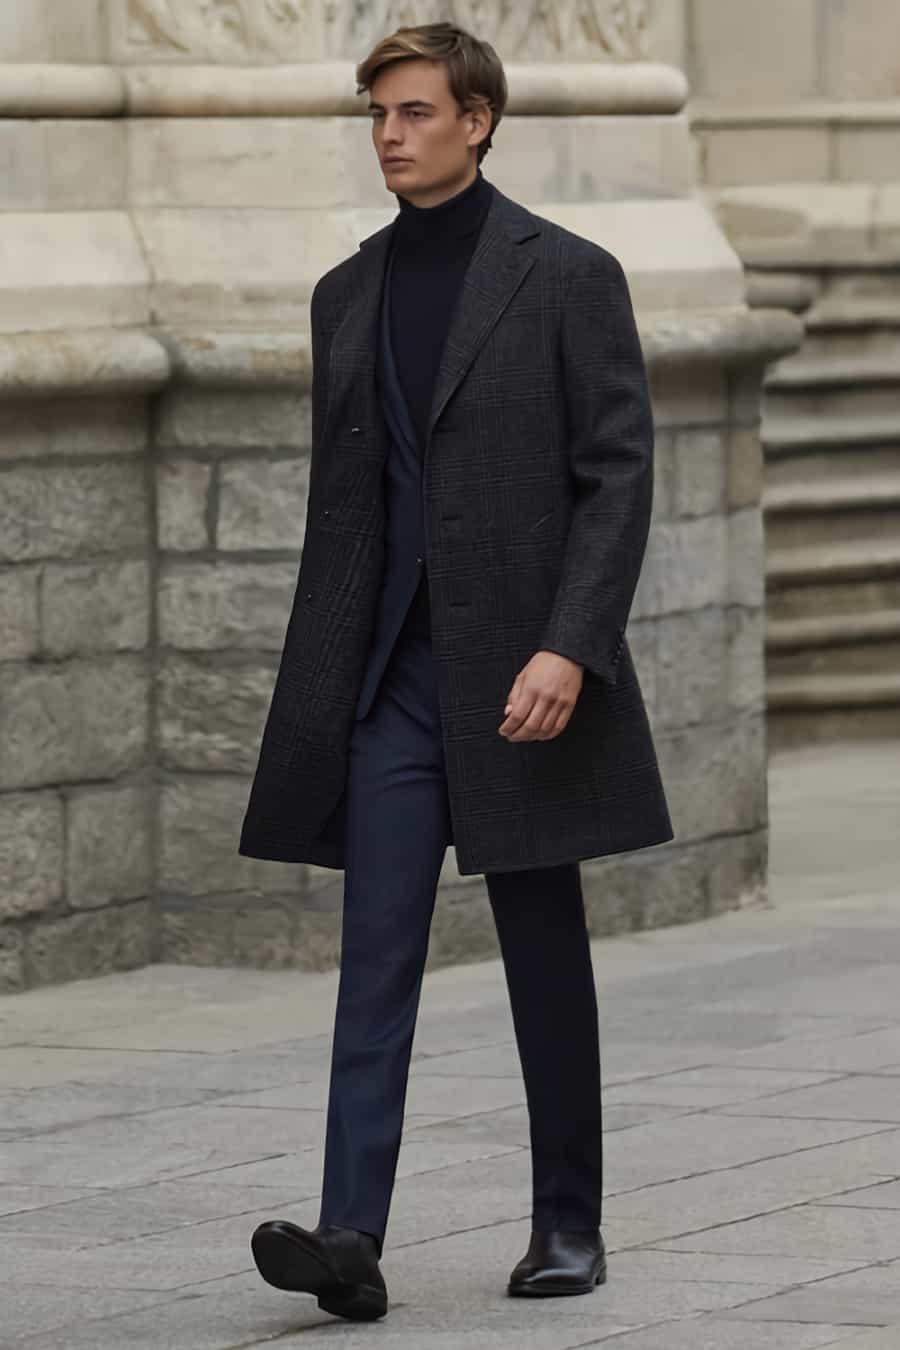 Men's navy suit, black turtleneck, black boots and checked overcoat outfit